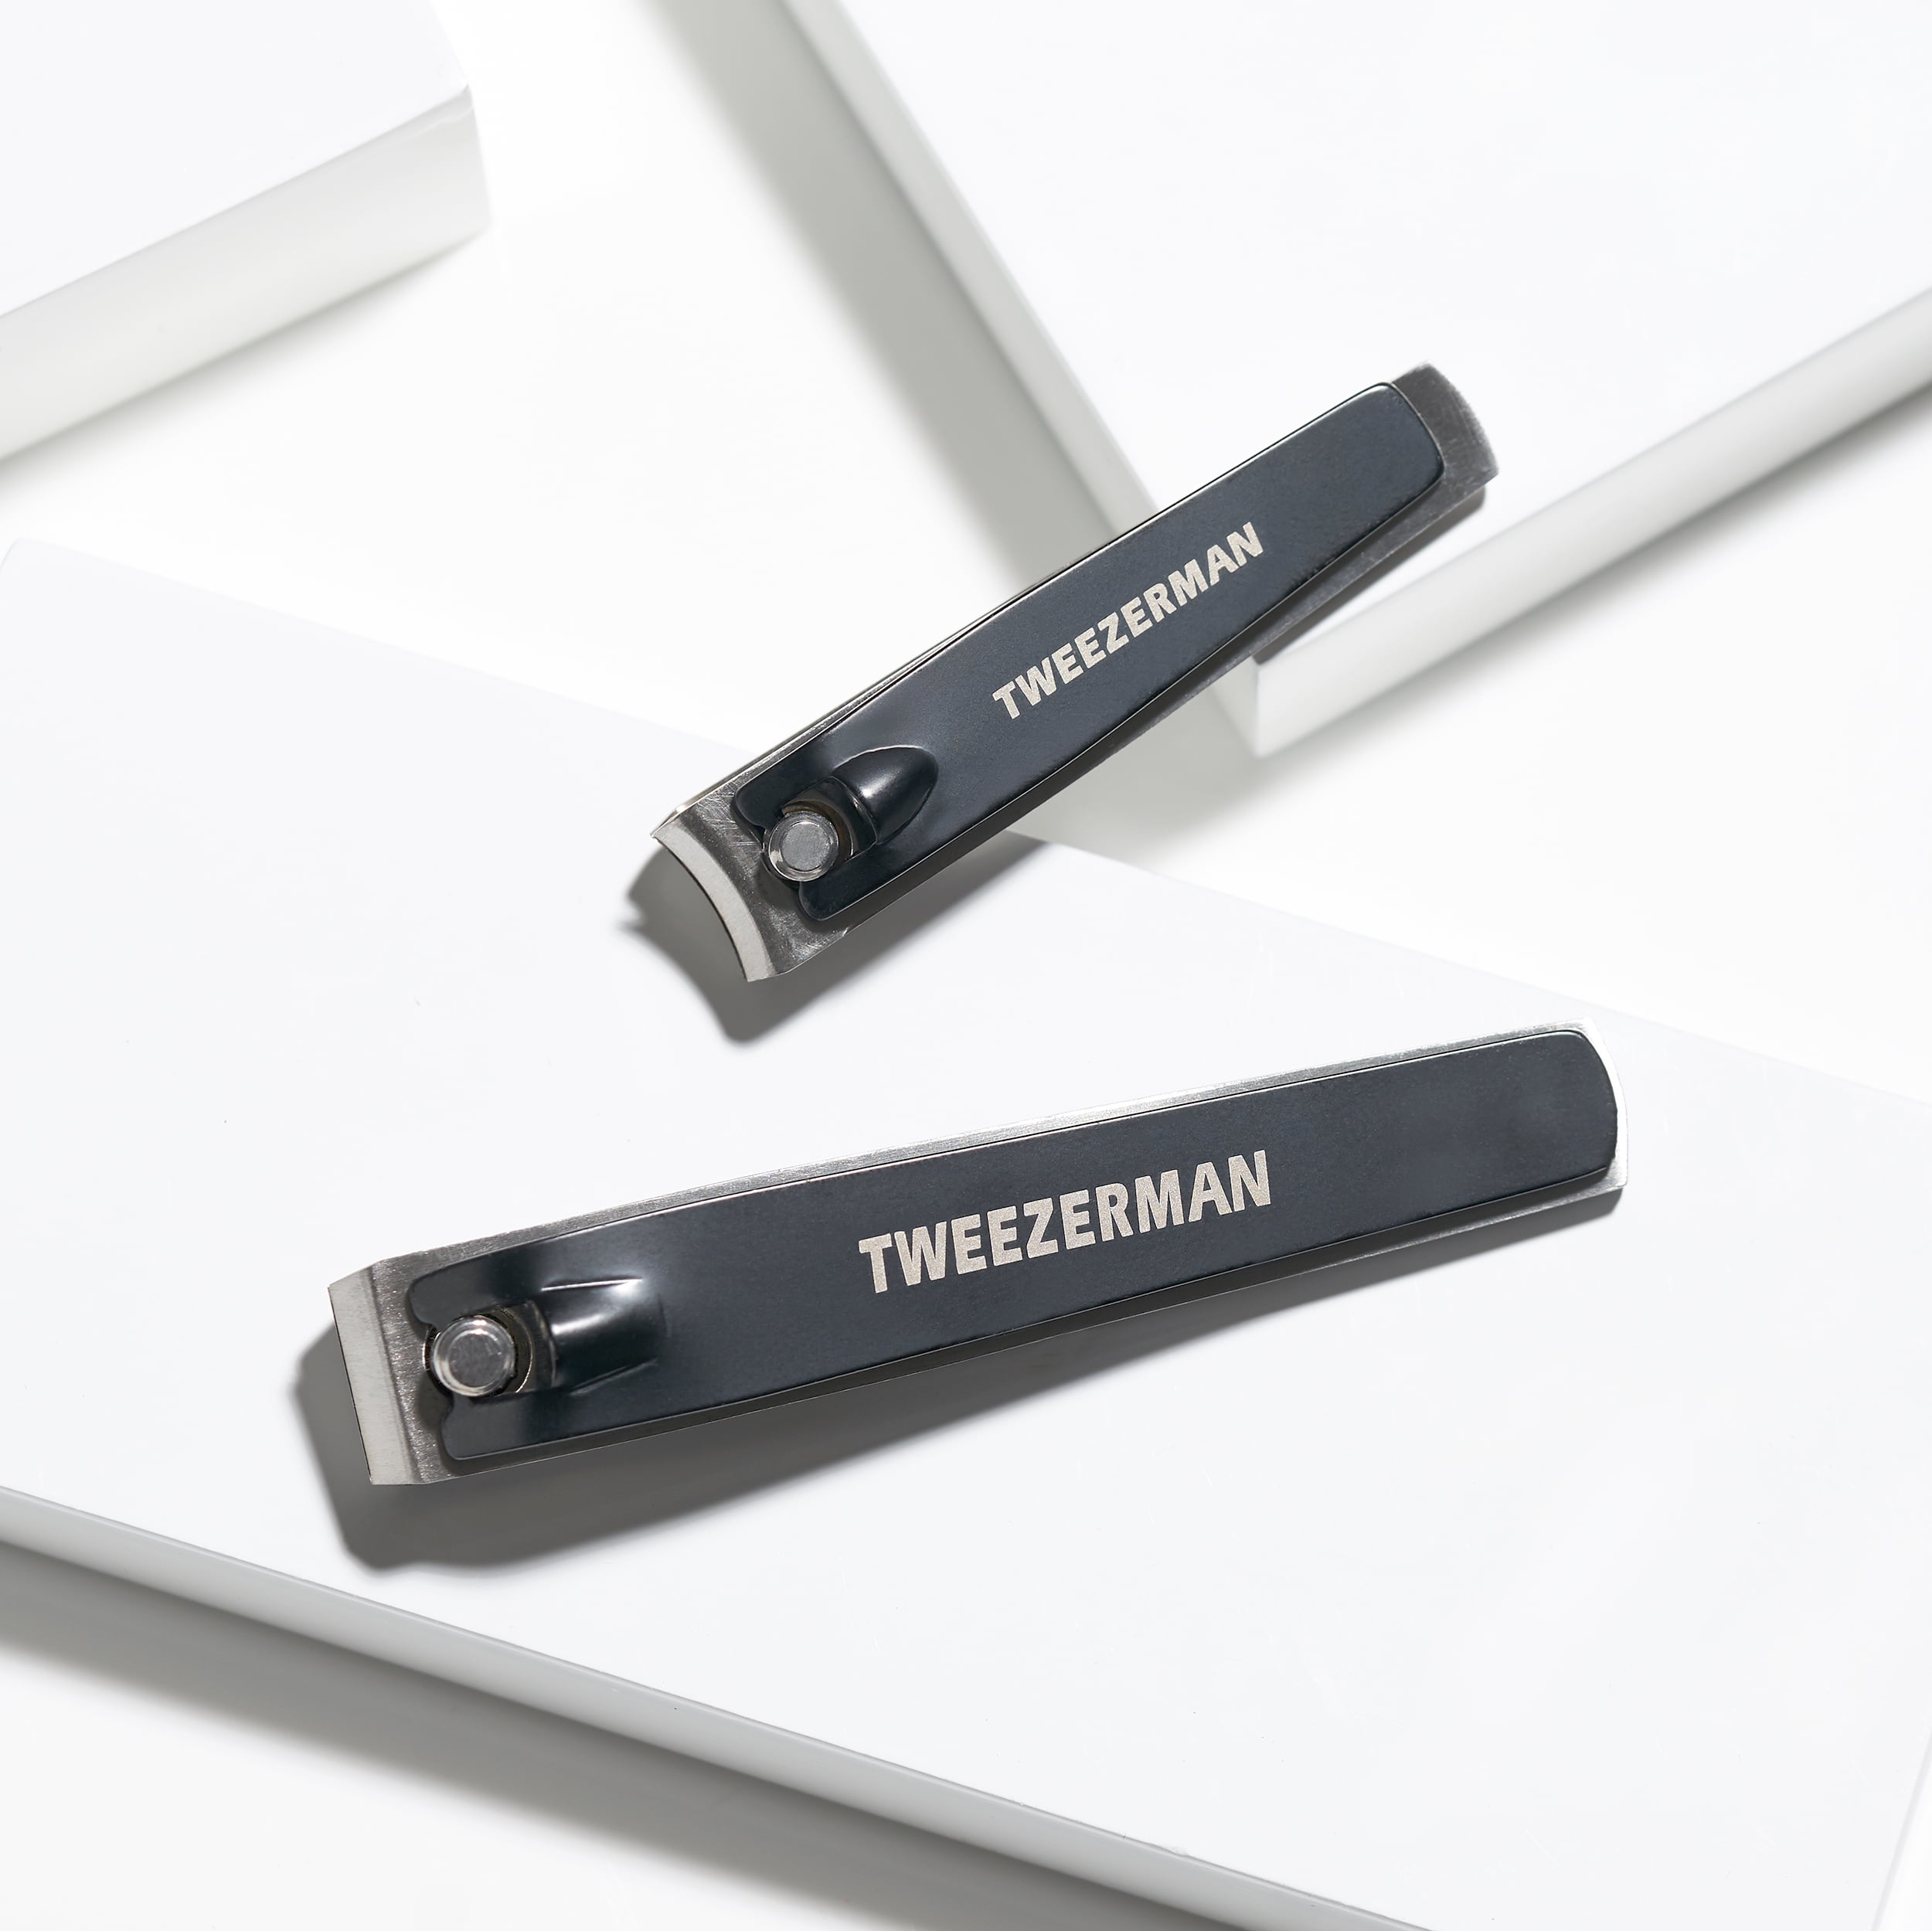 2 Tweezerman Nail Stainless Nail Clipper Care for Piece Set Steel